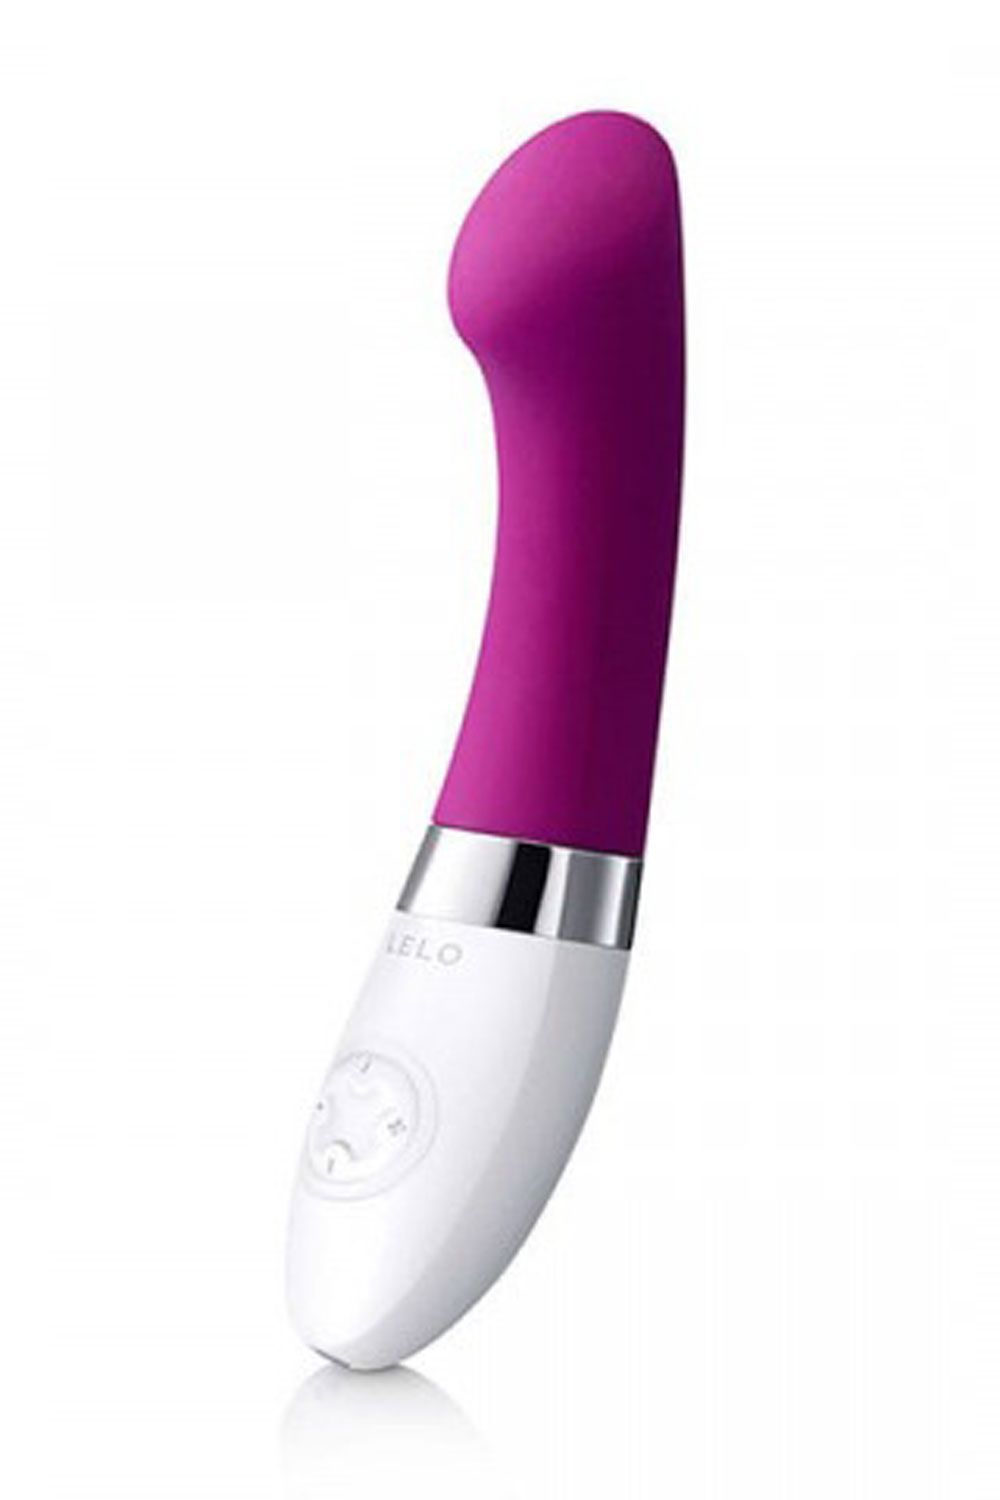 Sextoy and a pecker for her holes